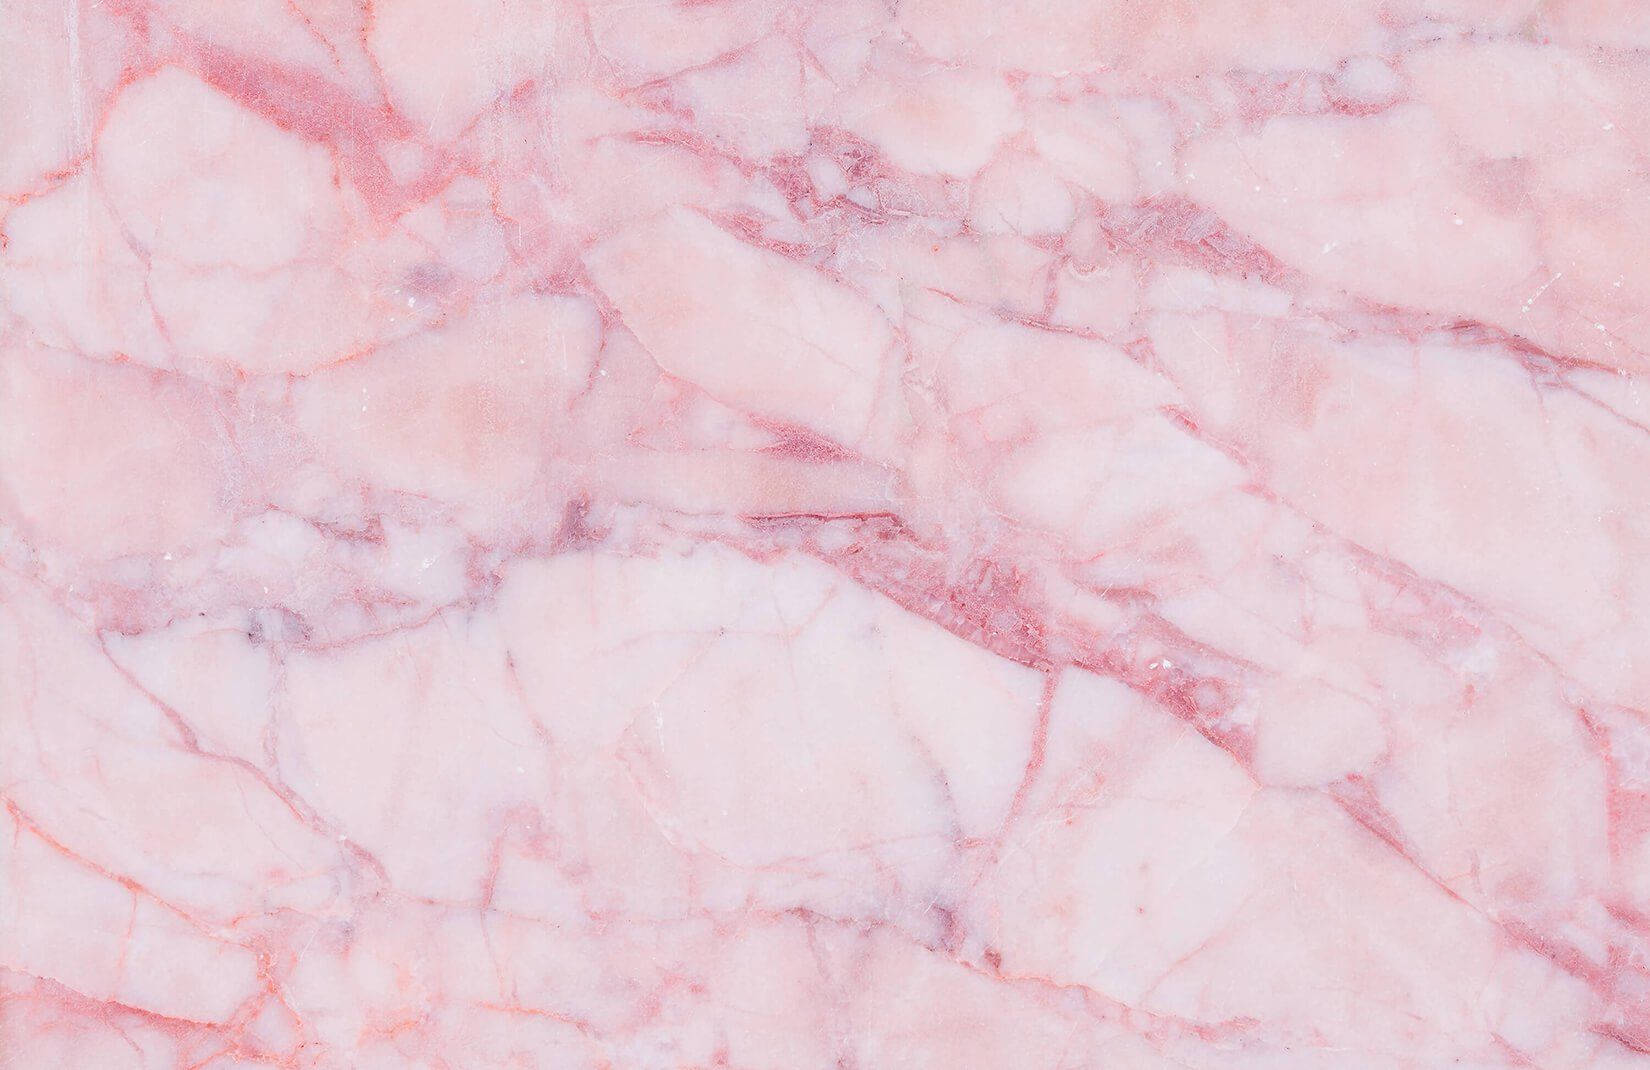 Free Aesthetic Marble Wallpaper Downloads, Aesthetic Marble Wallpaper for FREE